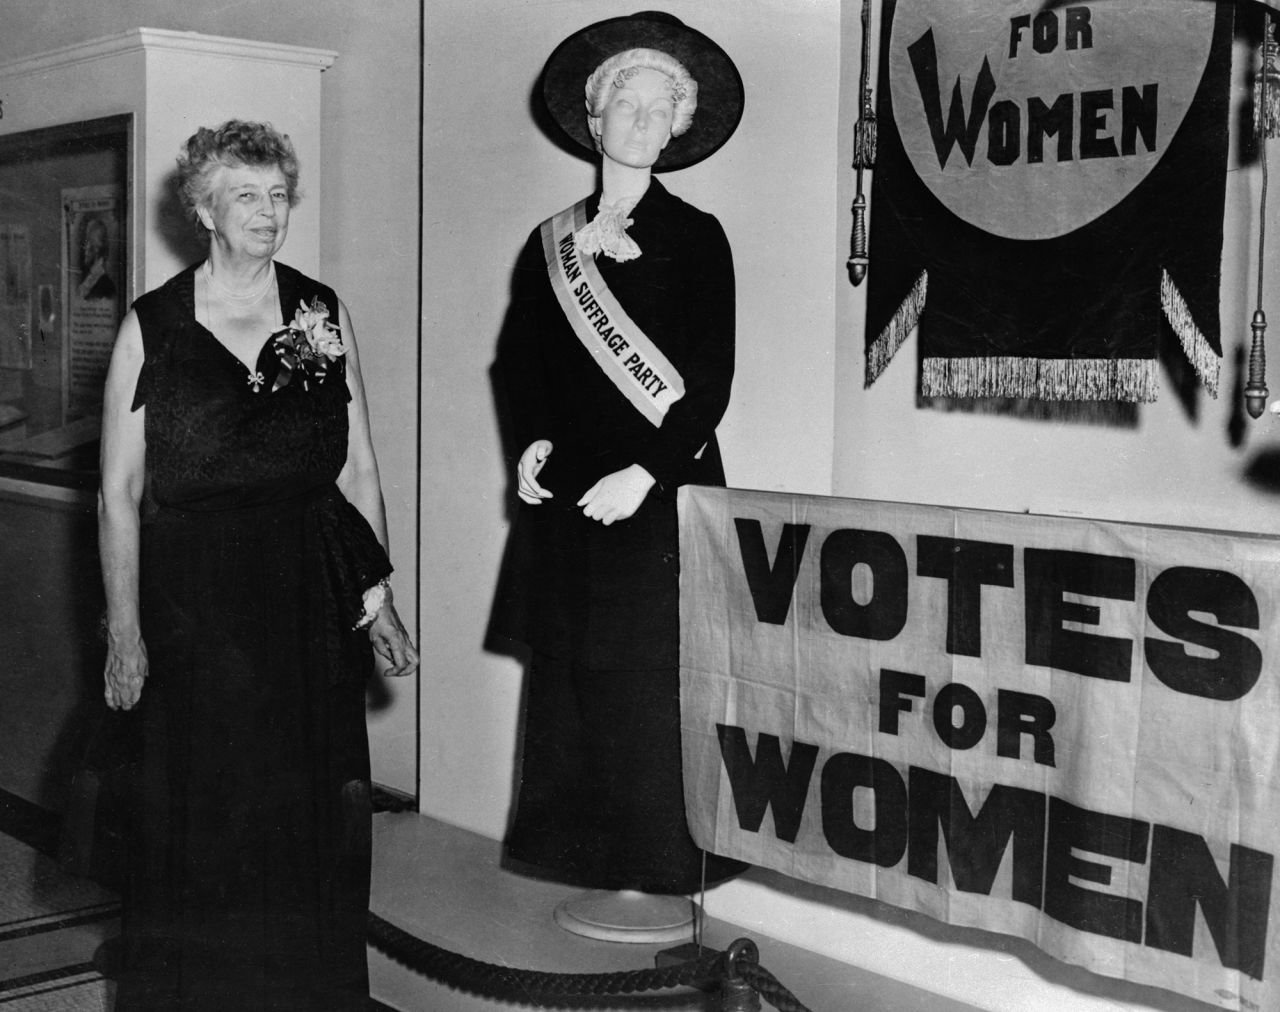 Former first lady Eleanor Roosevelt visits the Vote for Women exhibit at the New York Historical Society in 1952. Often hailed the "First Lady of the World," Roosevelt was one of the most politically active first ladies to step foot in the White House. She served on the UN Commission on Human Rights and encouraged her husband, President Franklin Roosevelt, to appoint more women to federal positions. "The battle for the individual rights of women is one of long standing and none of us should countenance anything which undermines it," she wrote in her <a href="https://www2.gwu.edu/~erpapers/myday/displaydoc.cfm?_y=1941&_f=md055958" target="_blank" target="_blank">weekly "My Day" column.</a>